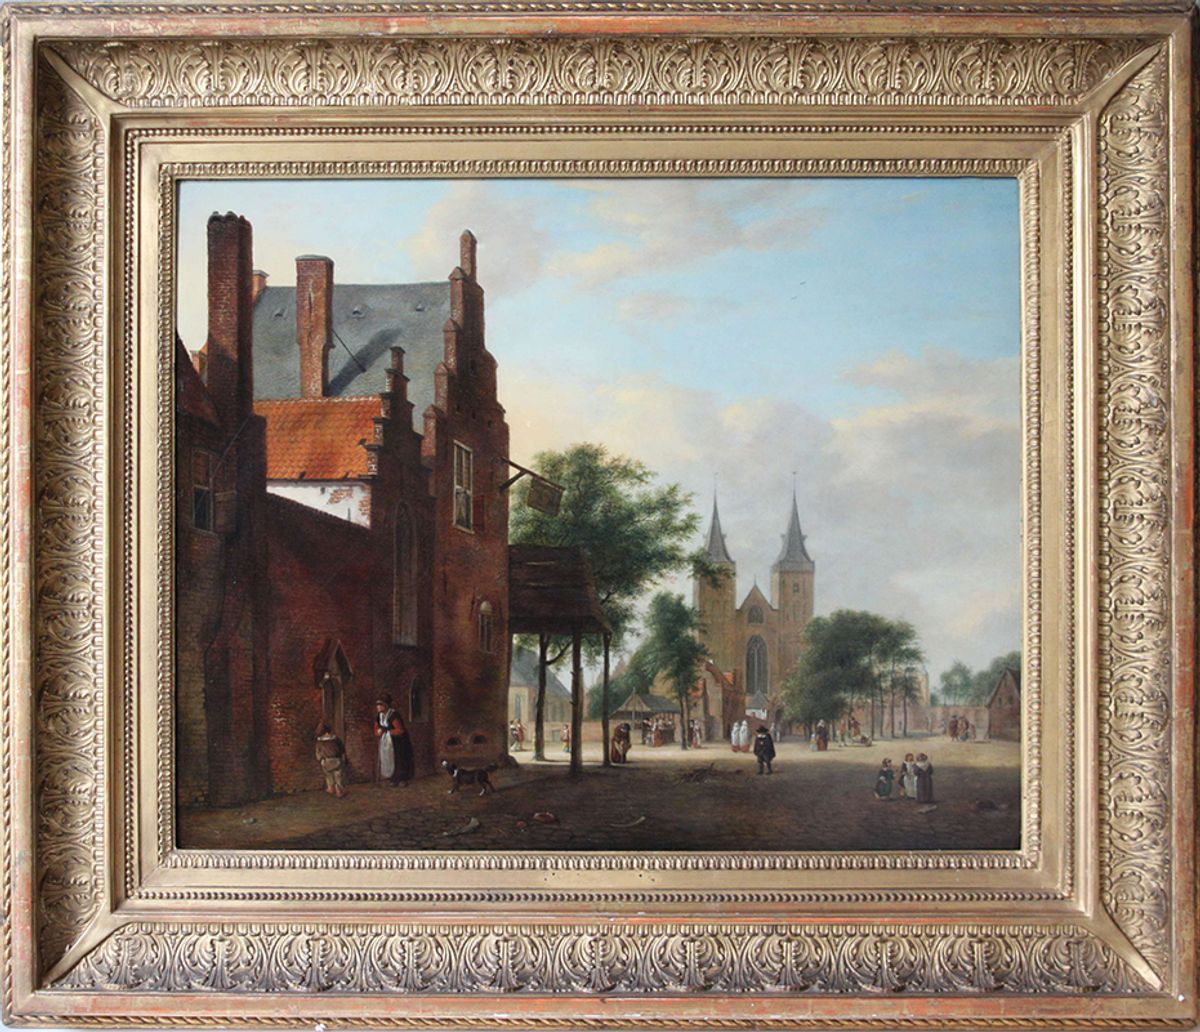 Jan van der Heyden's View of a Dutch Square (around 1700) Courtesy of Looted Art Commission